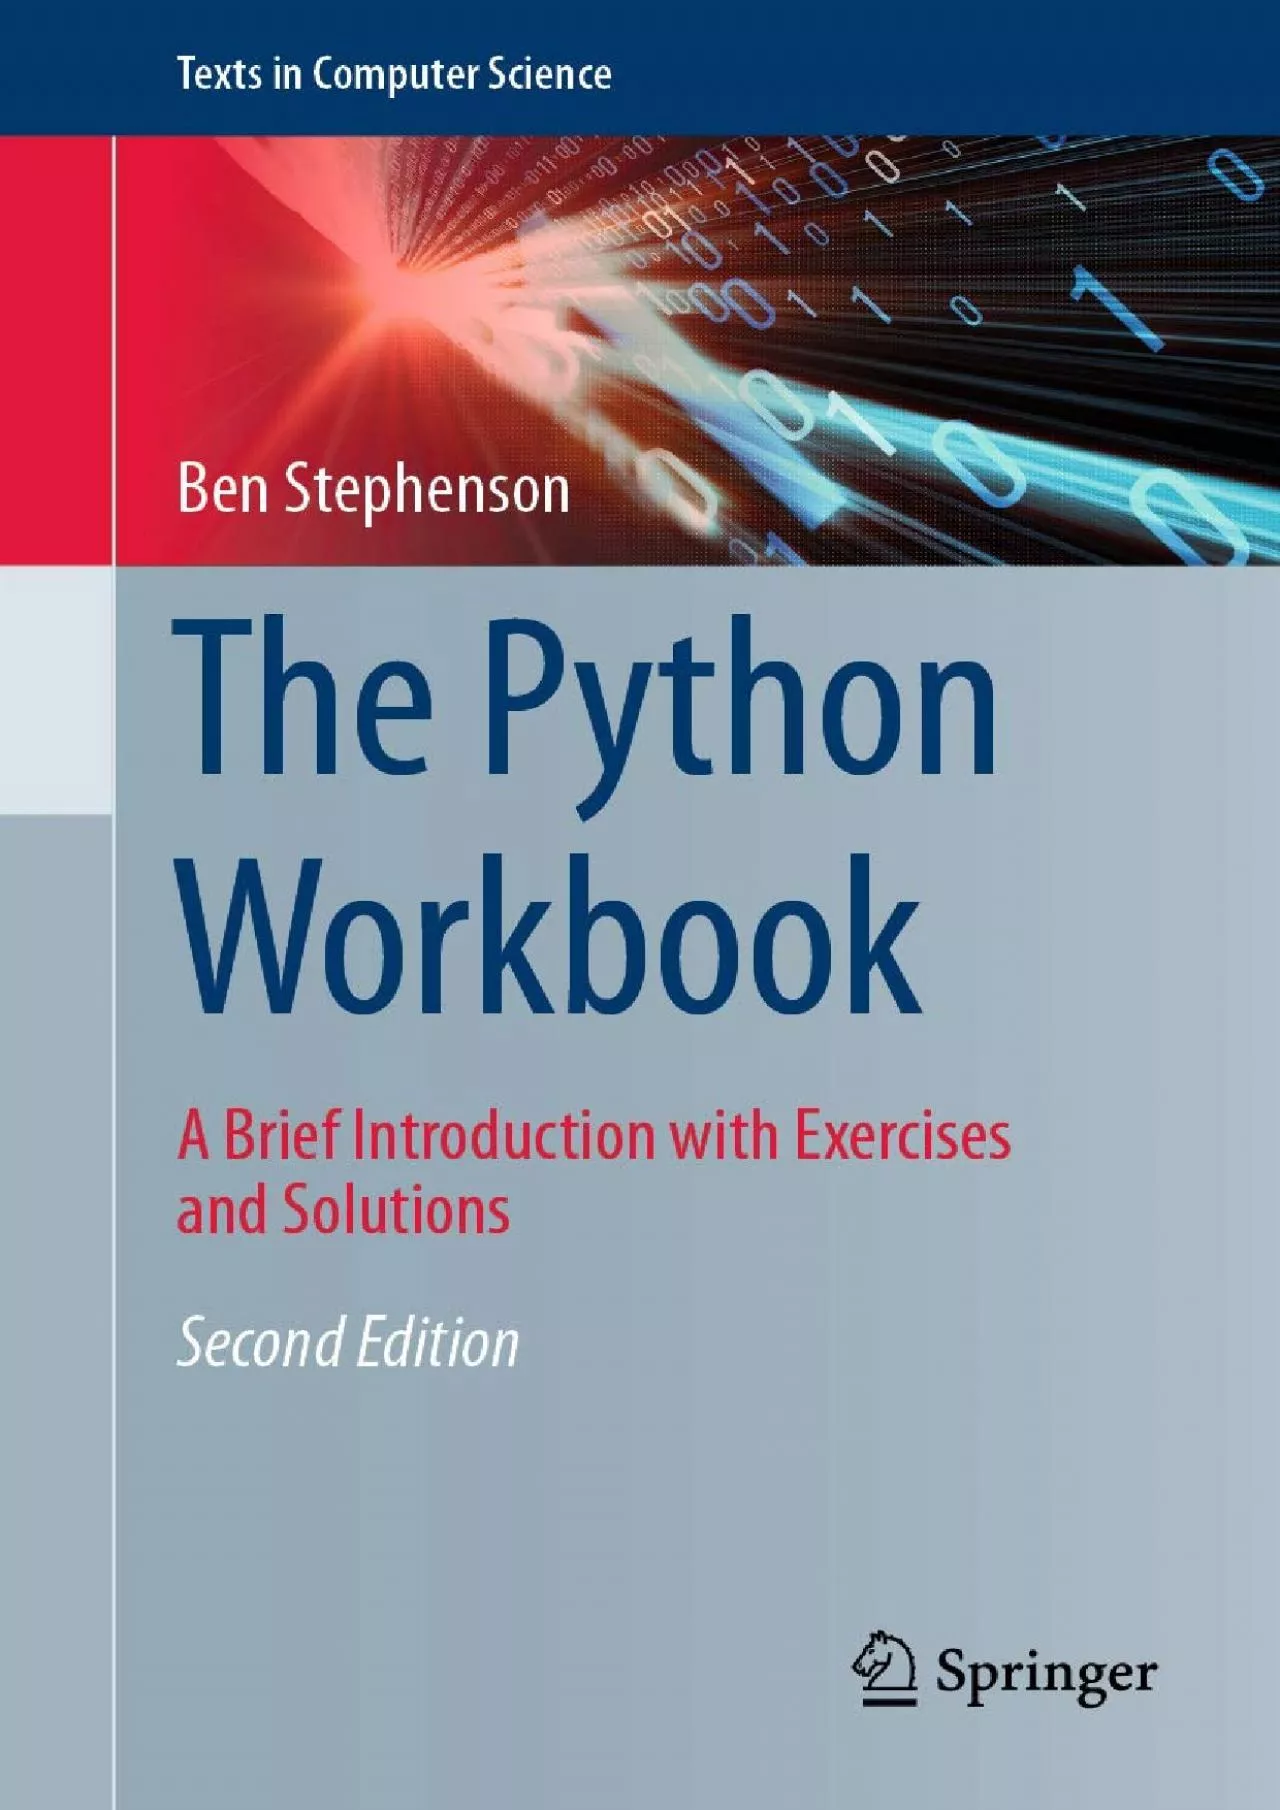 [READING BOOK]-The Python Workbook: A Brief Introduction with Exercises and Solutions